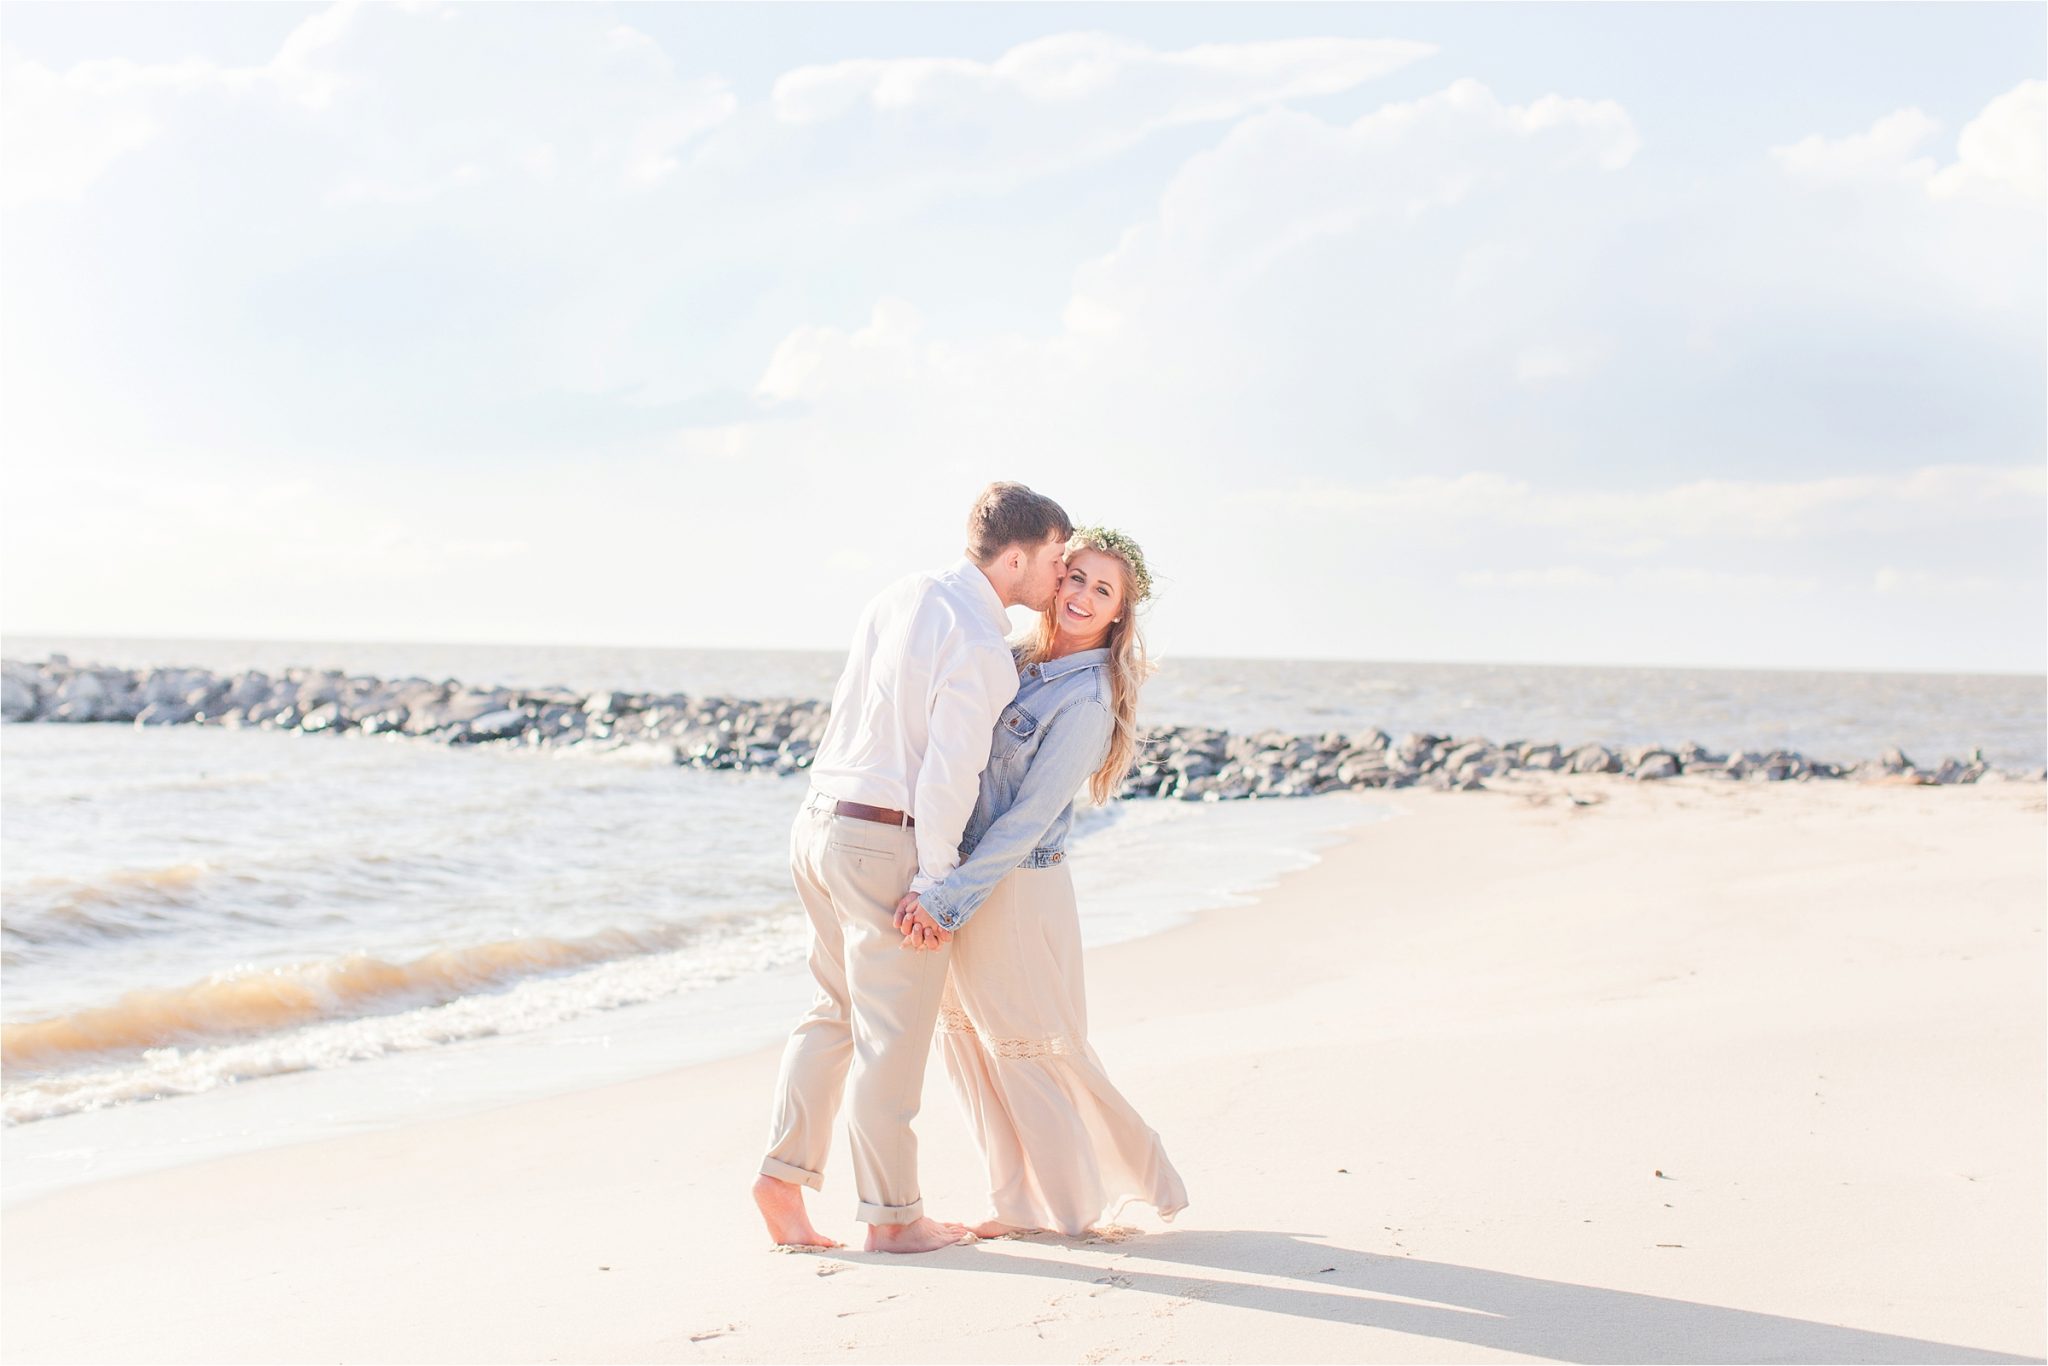 Point Clear Engagement Session at the Grand Hotel-Mary Catherine + Chase-Whimsical engagement shoot-Neutral engagement shoot-Fairytale engagement shoot-Beach engagement